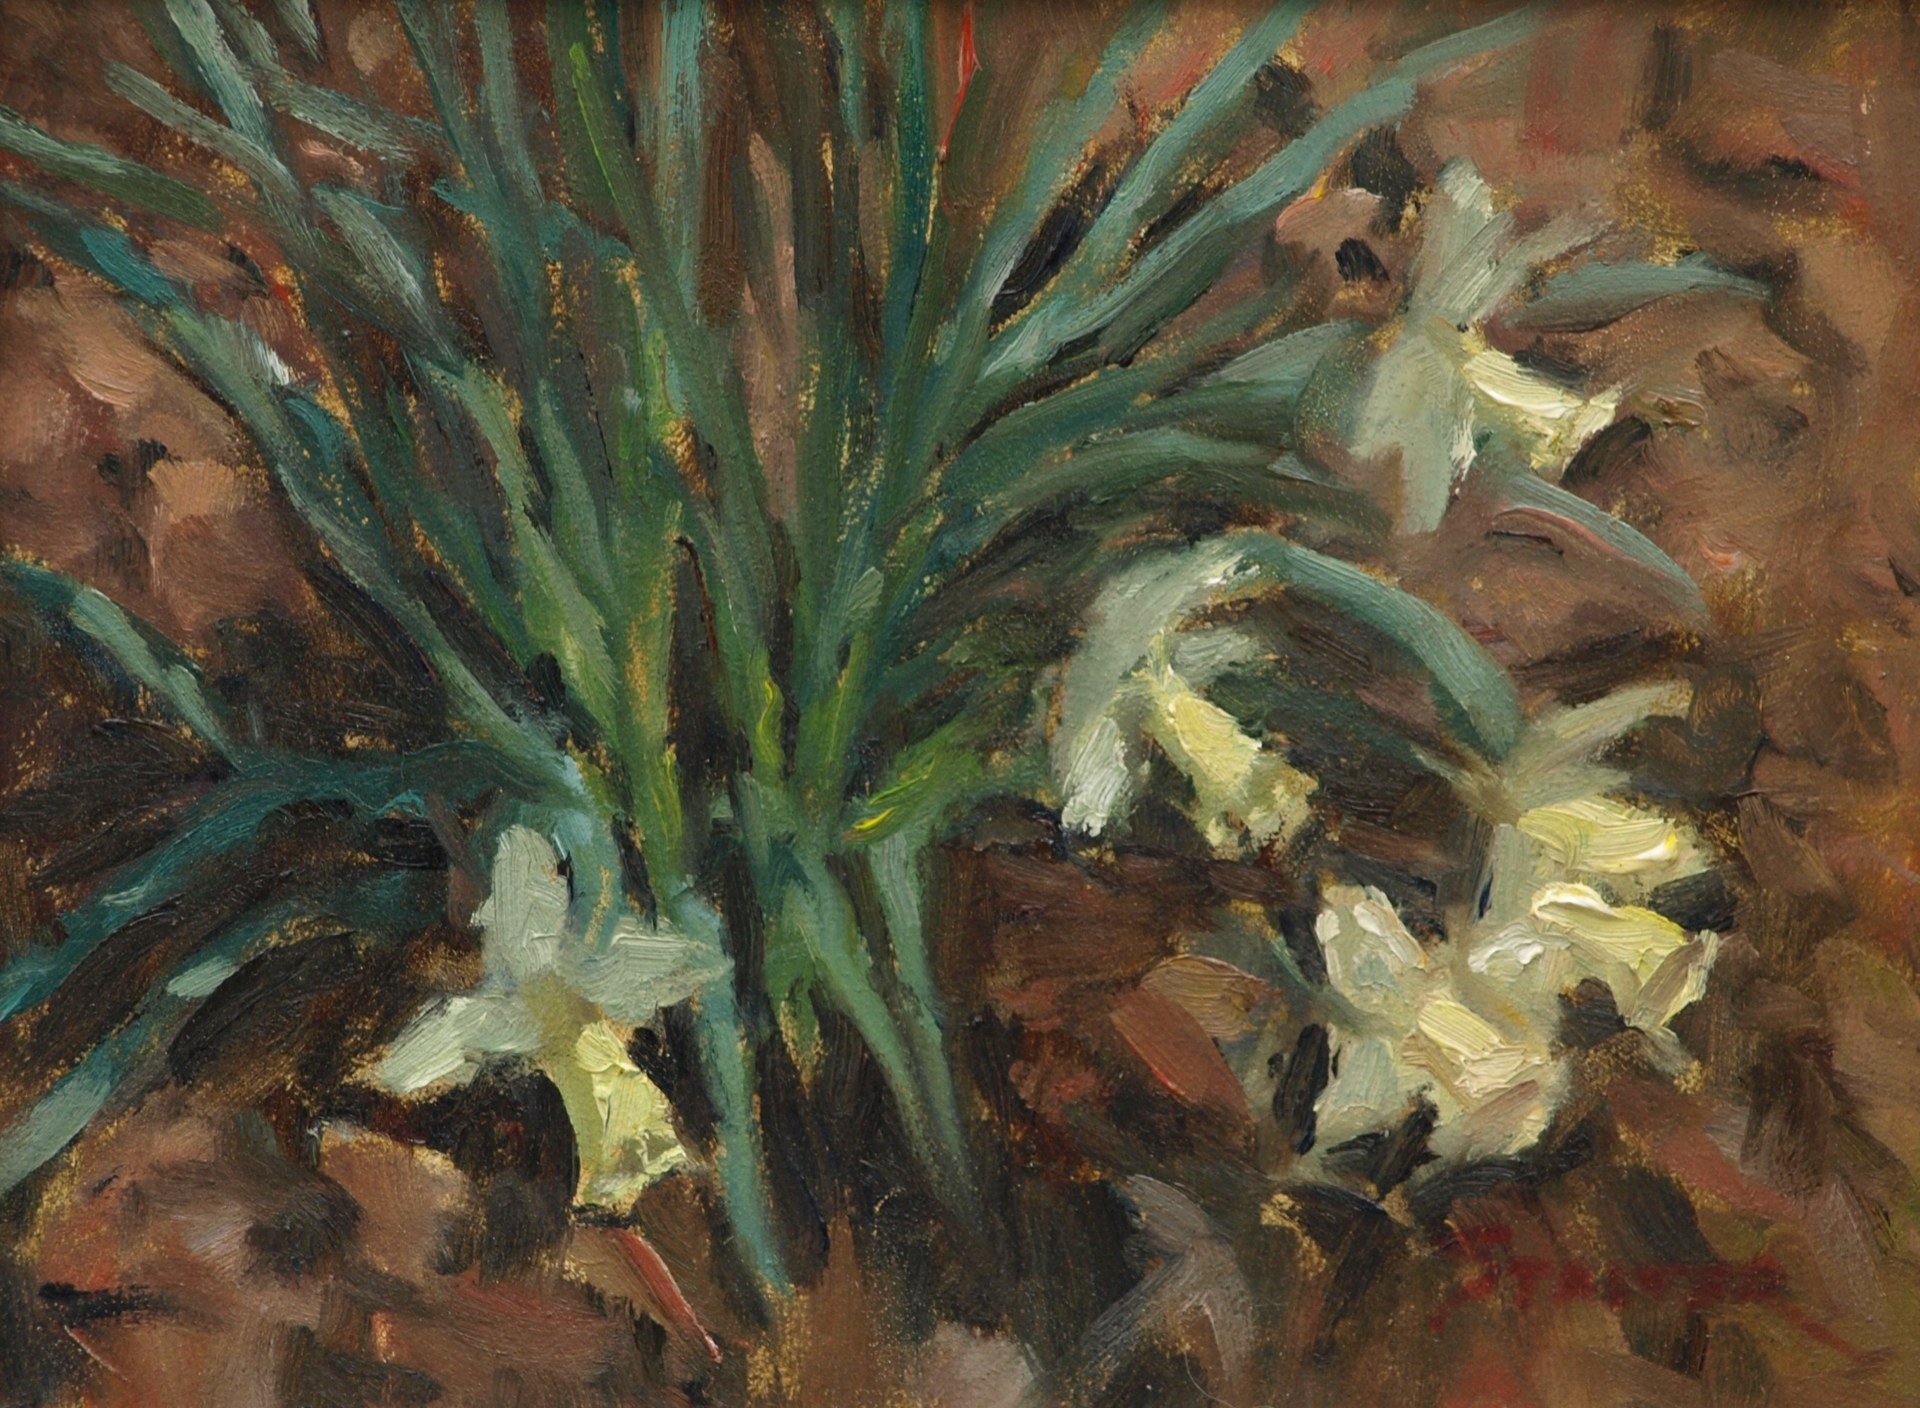 Daffodils, Oil on Panel, 9 x 12 Inches, by Richard Stalter, $225